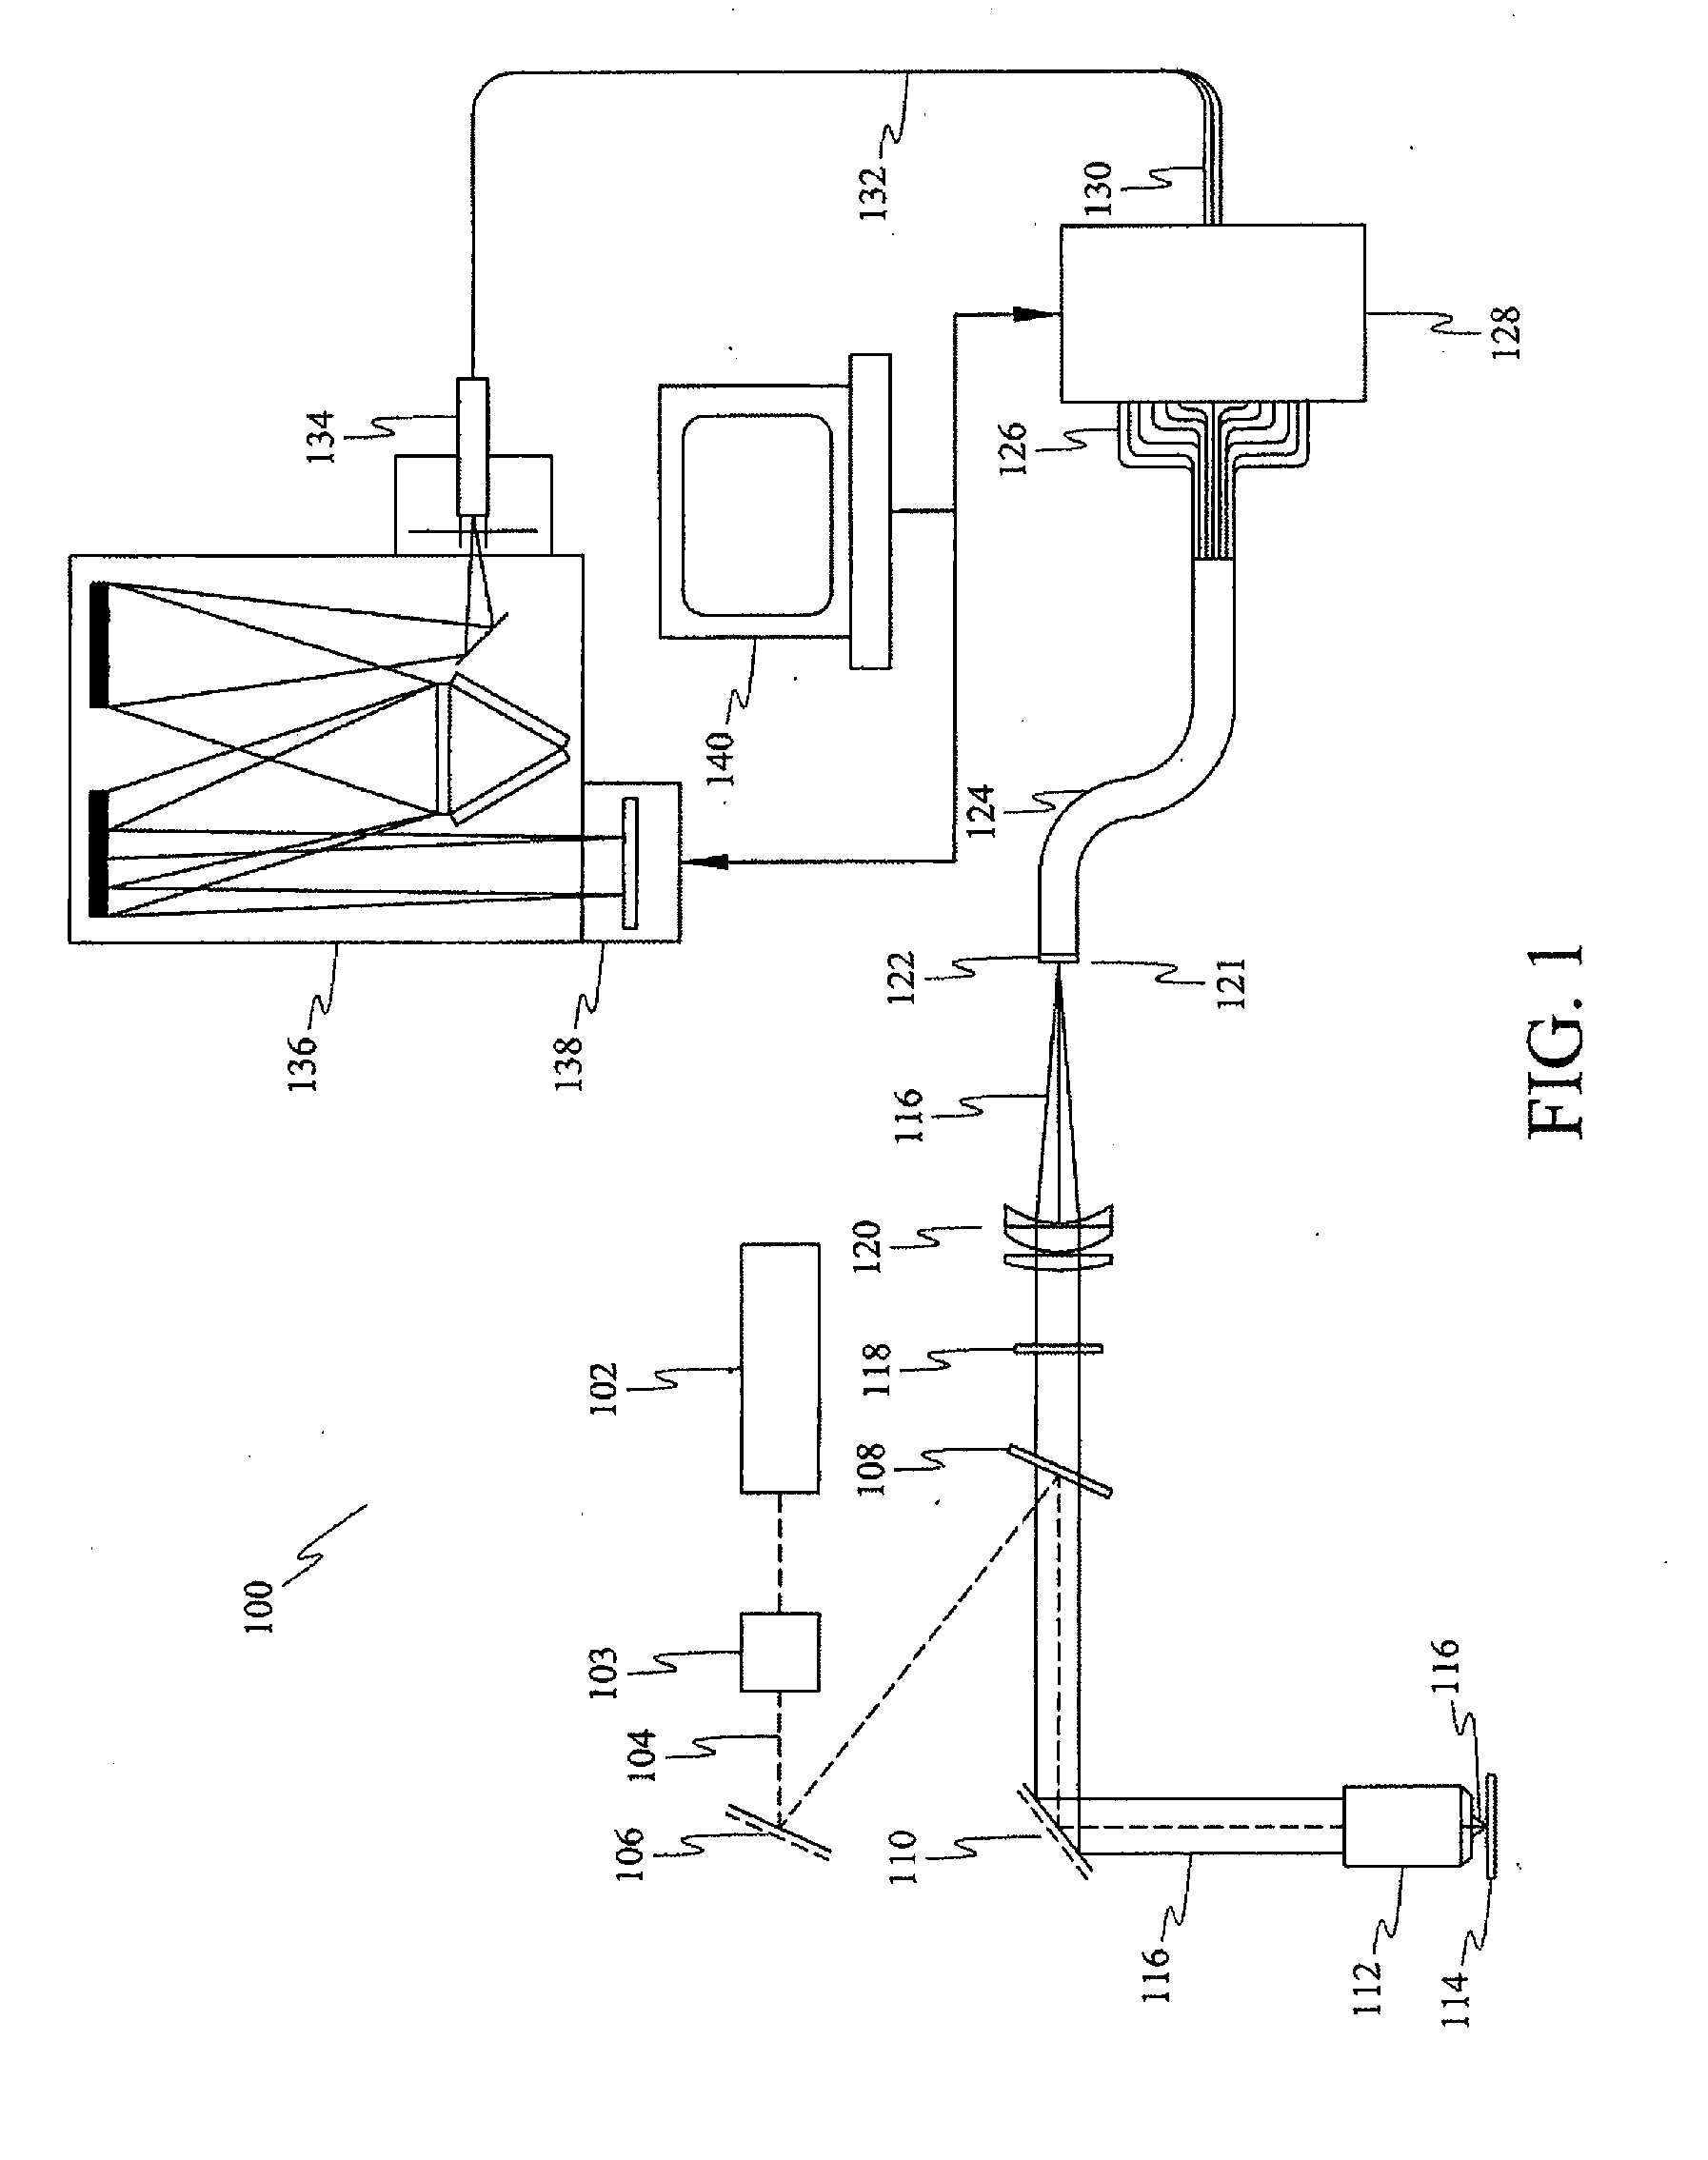 Method and apparatus for microlens array/fiber optic imaging